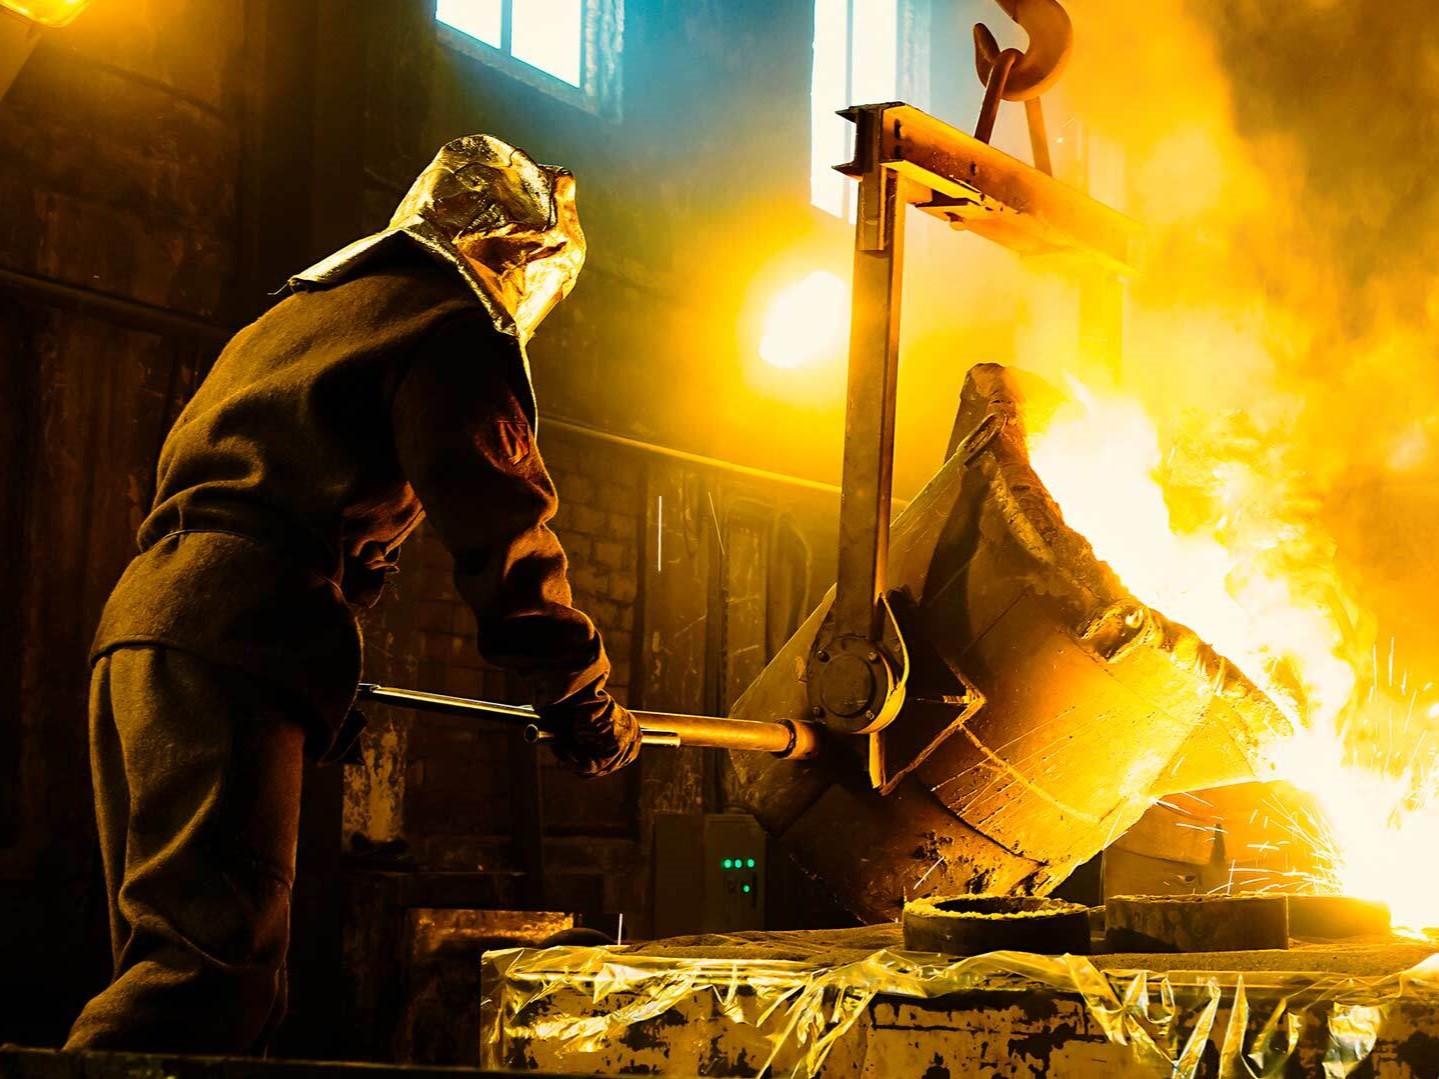 steelworker pouring molten steel into mold